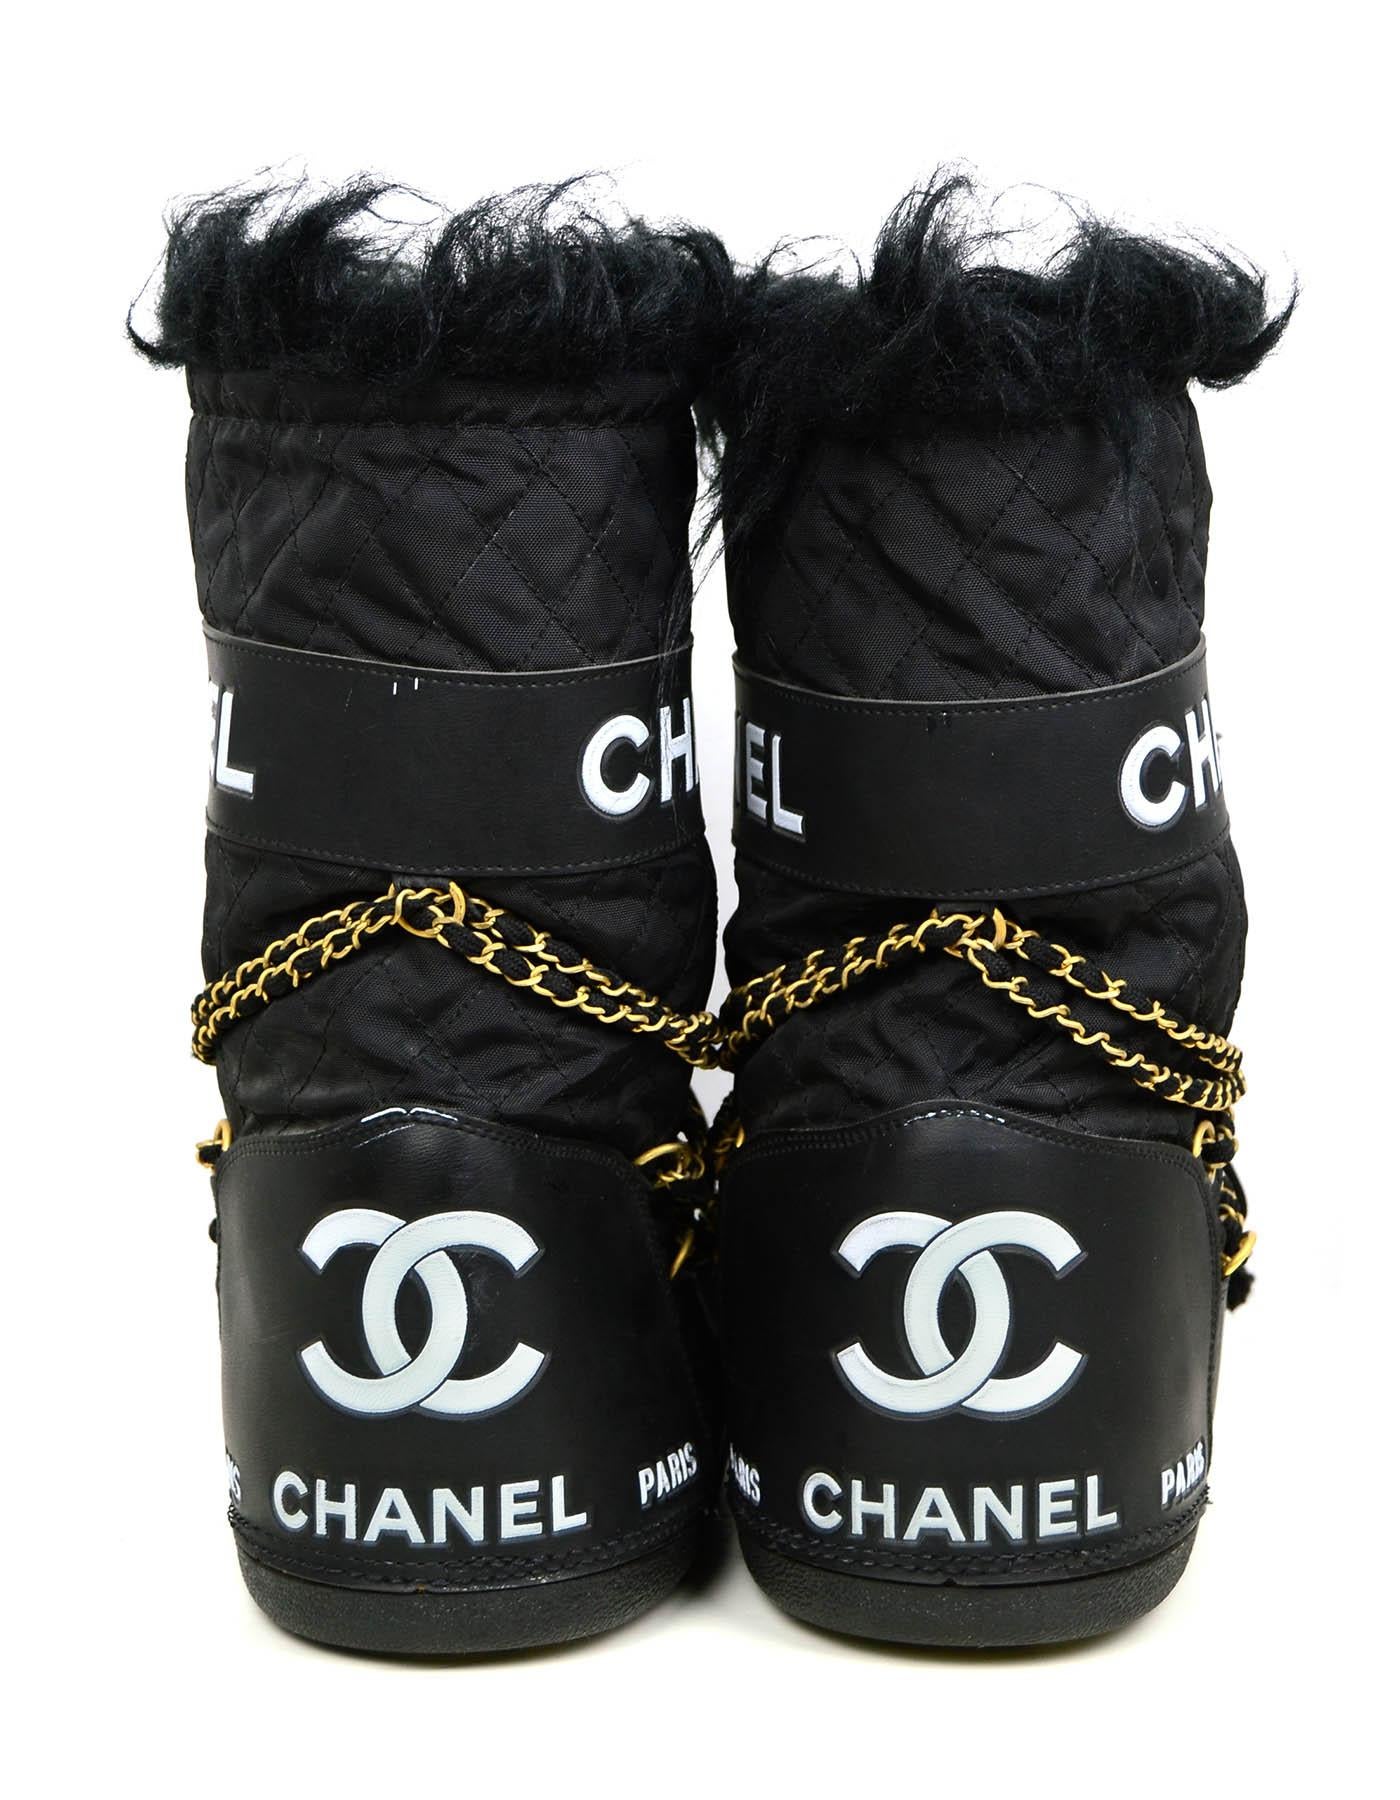 chanel 9 boots